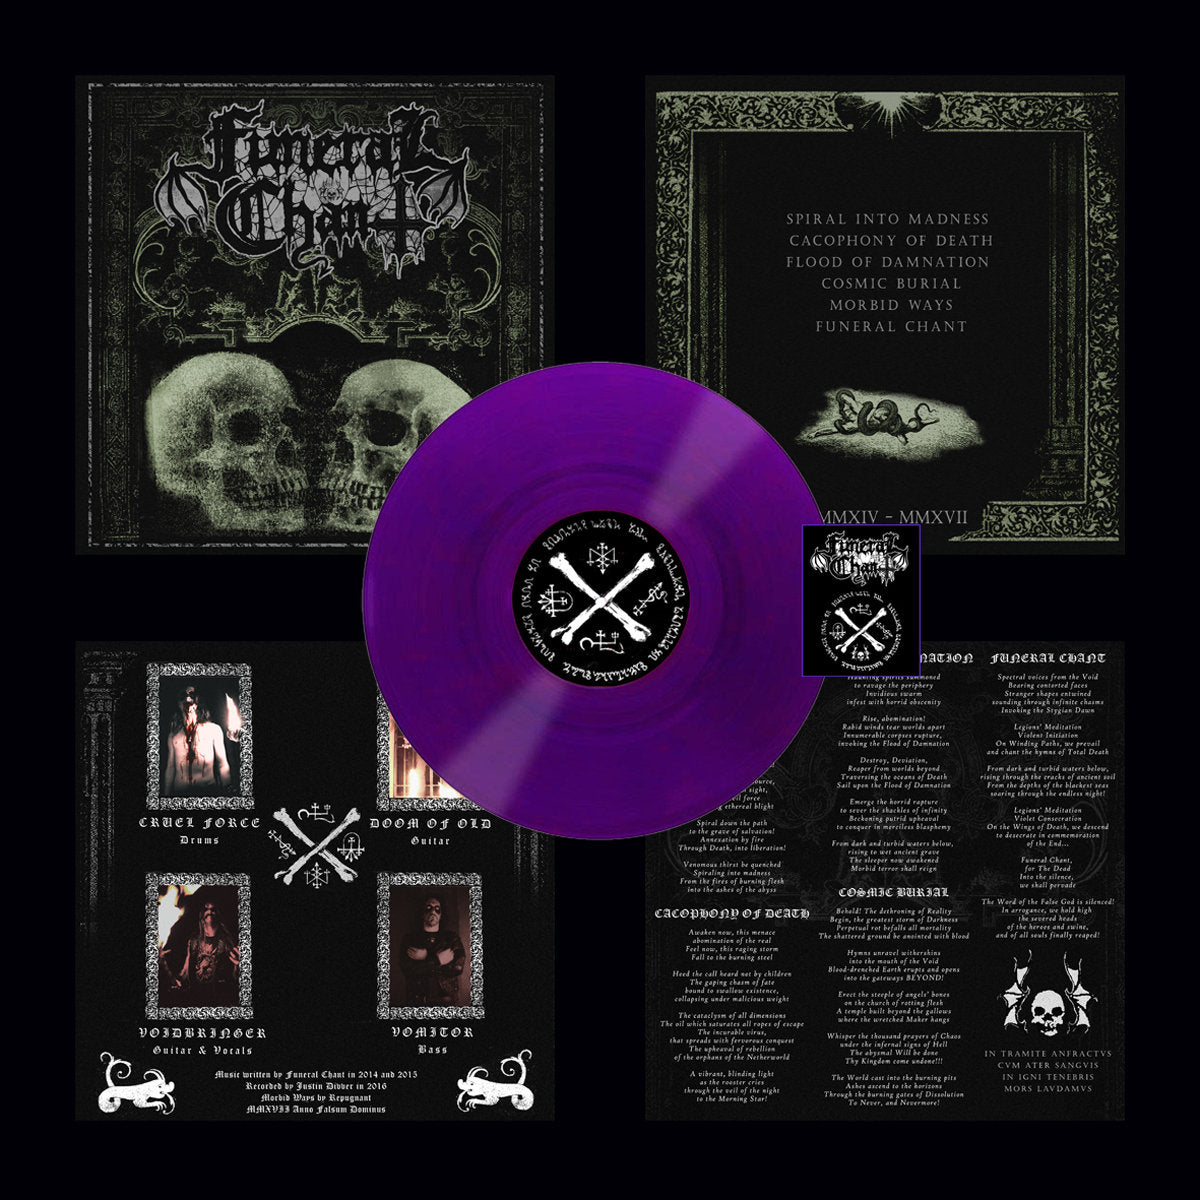 FUNERAL CHANT - Funeral Chant LP